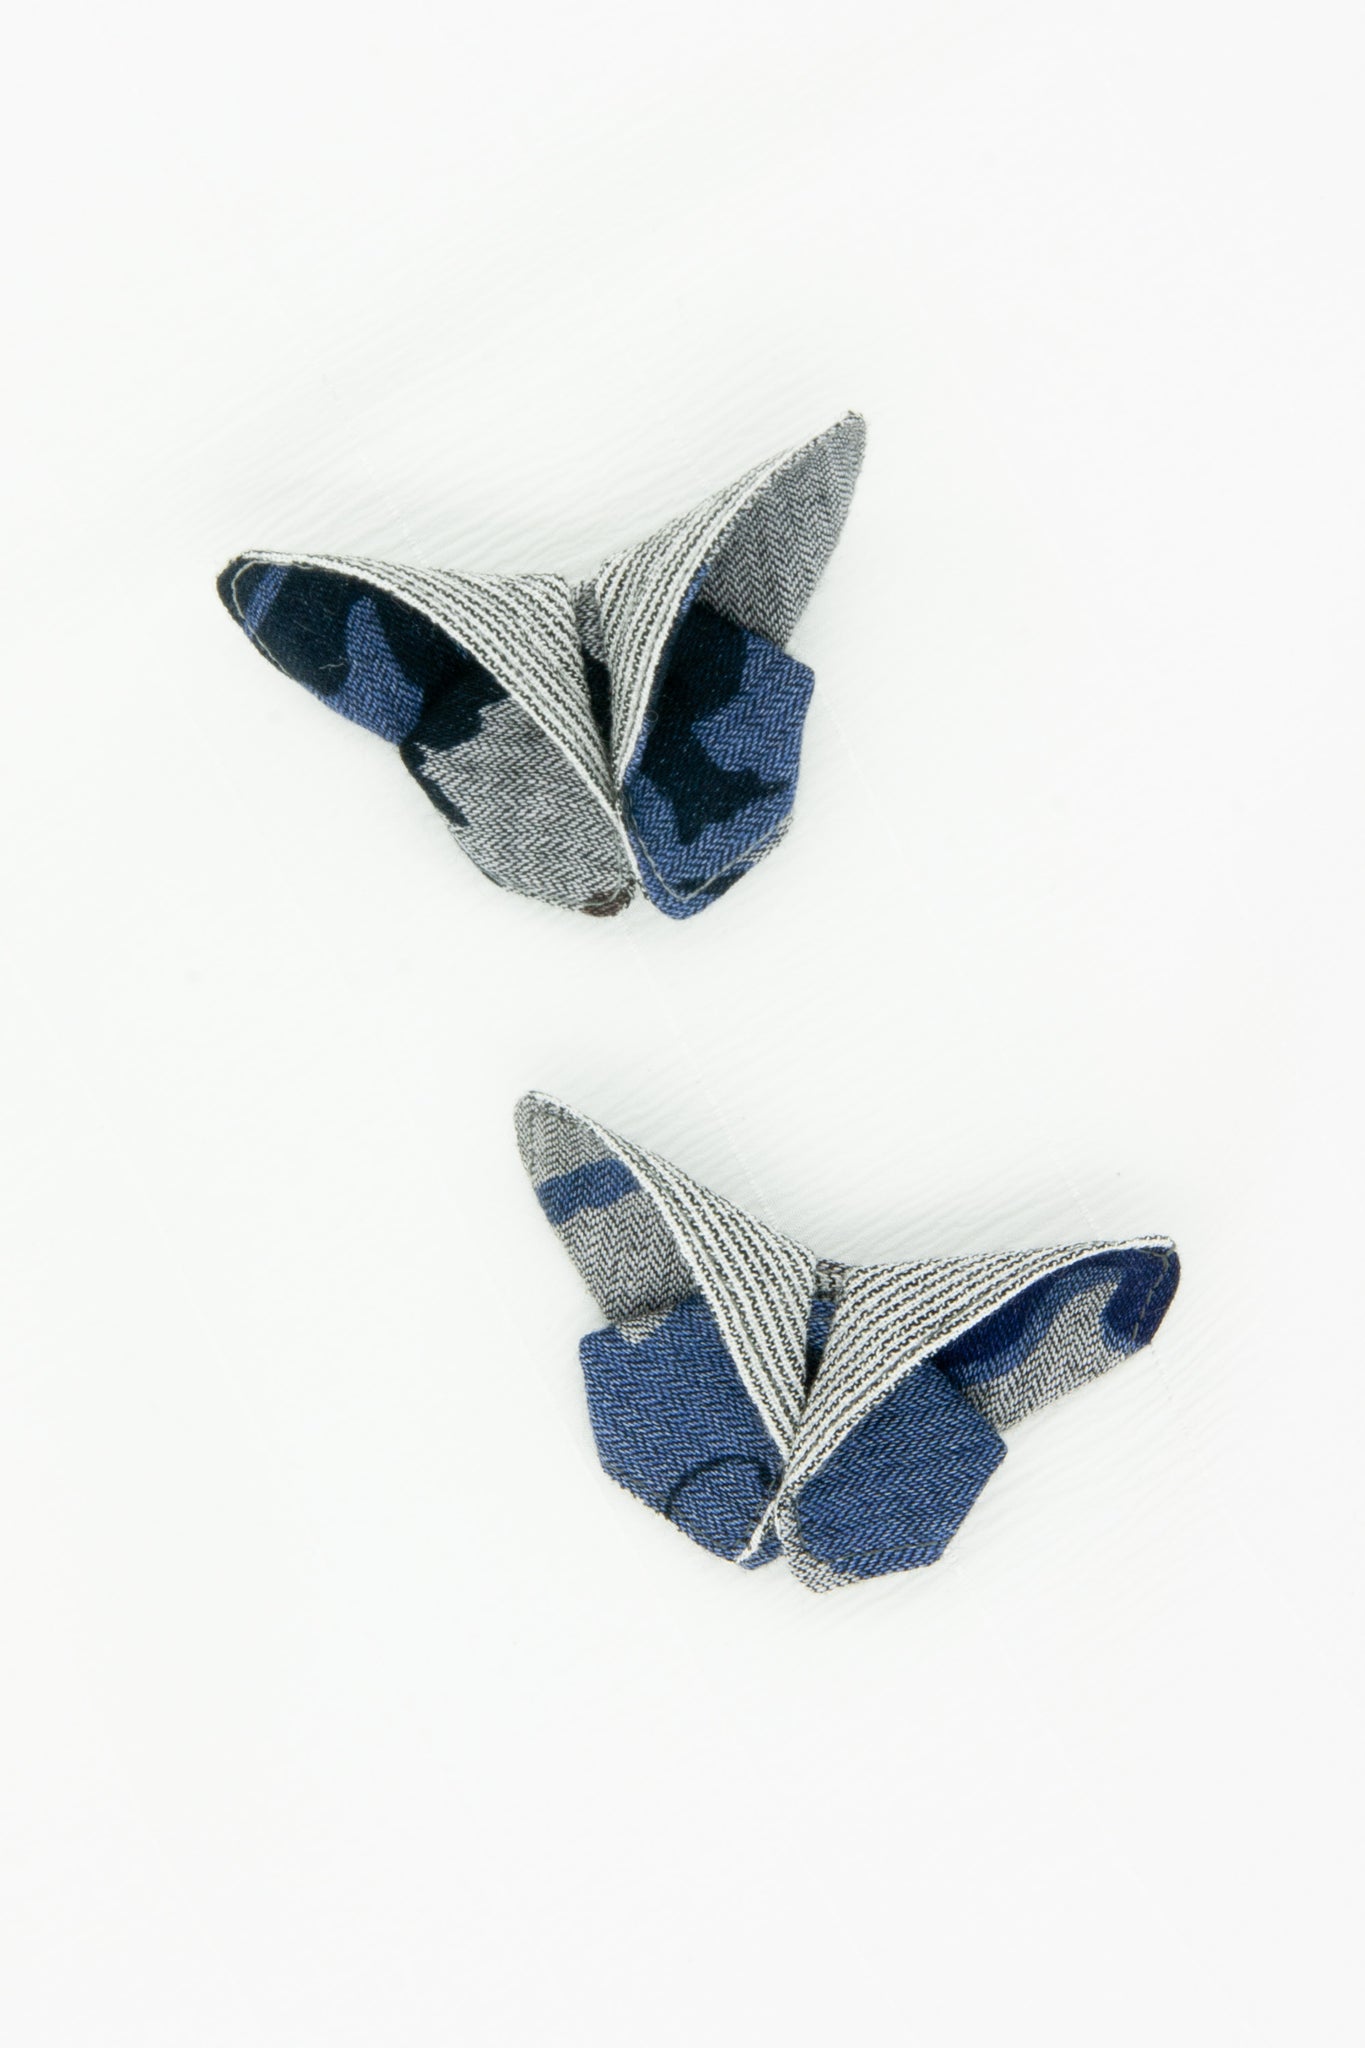 Butterfly Brooch in Blue/Gray Cotton Print and Stripes